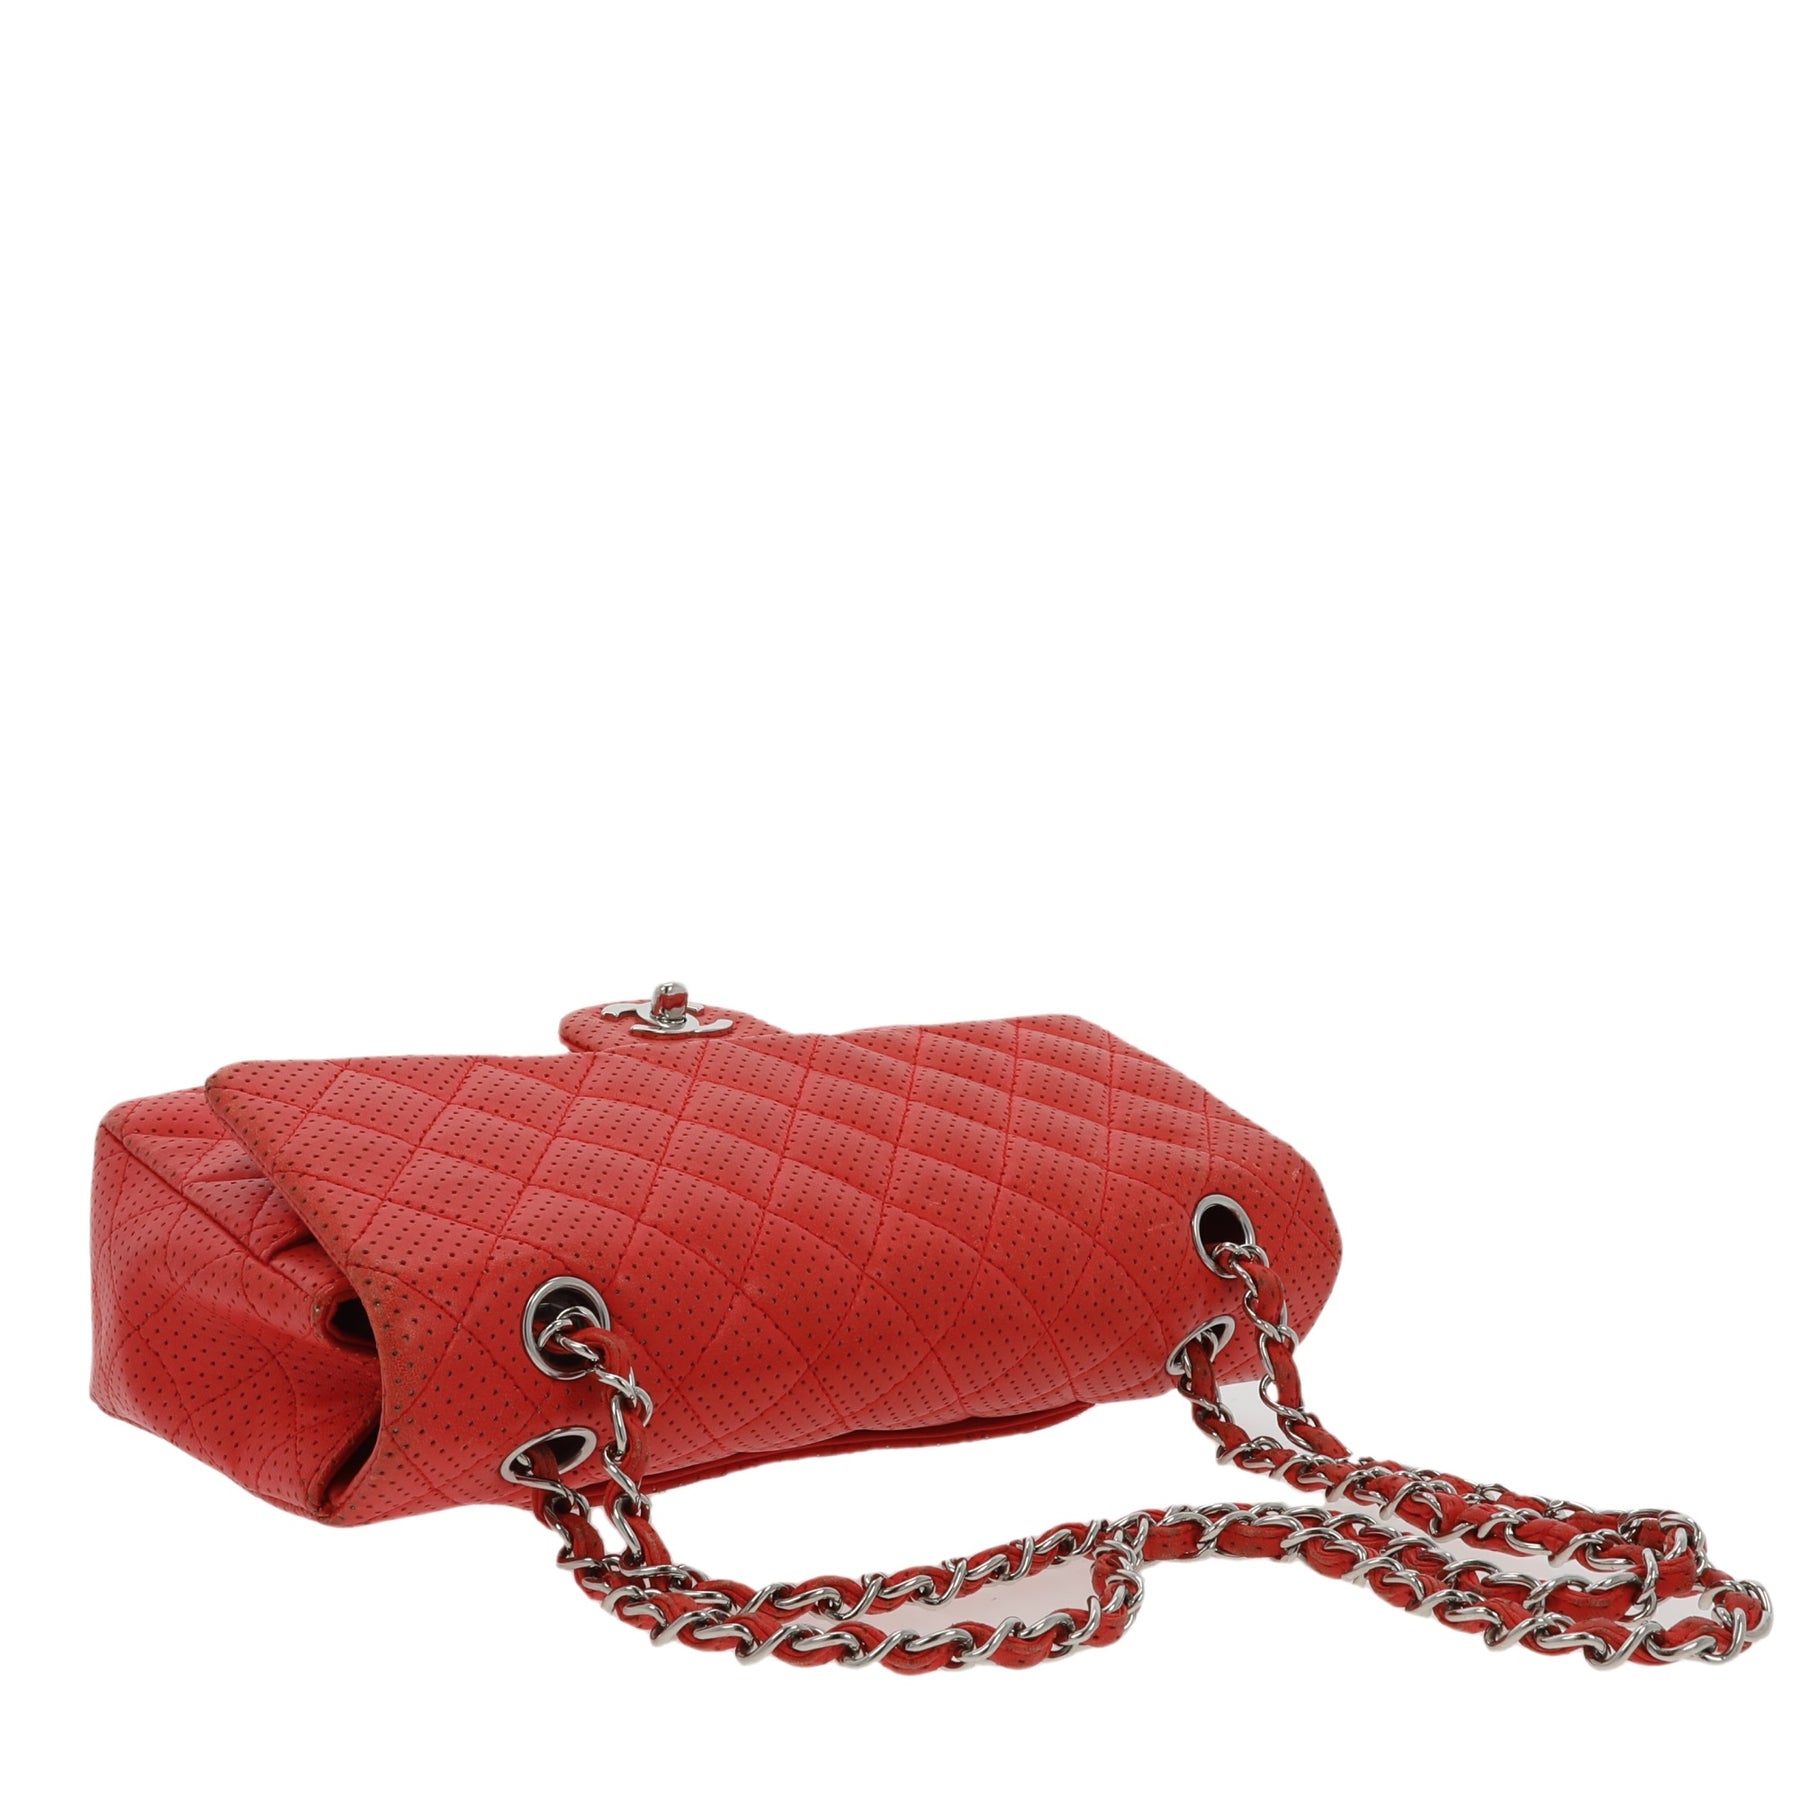 Chanel Timeless/Classique Shoulder Bag in Red Leather – Fancy Lux